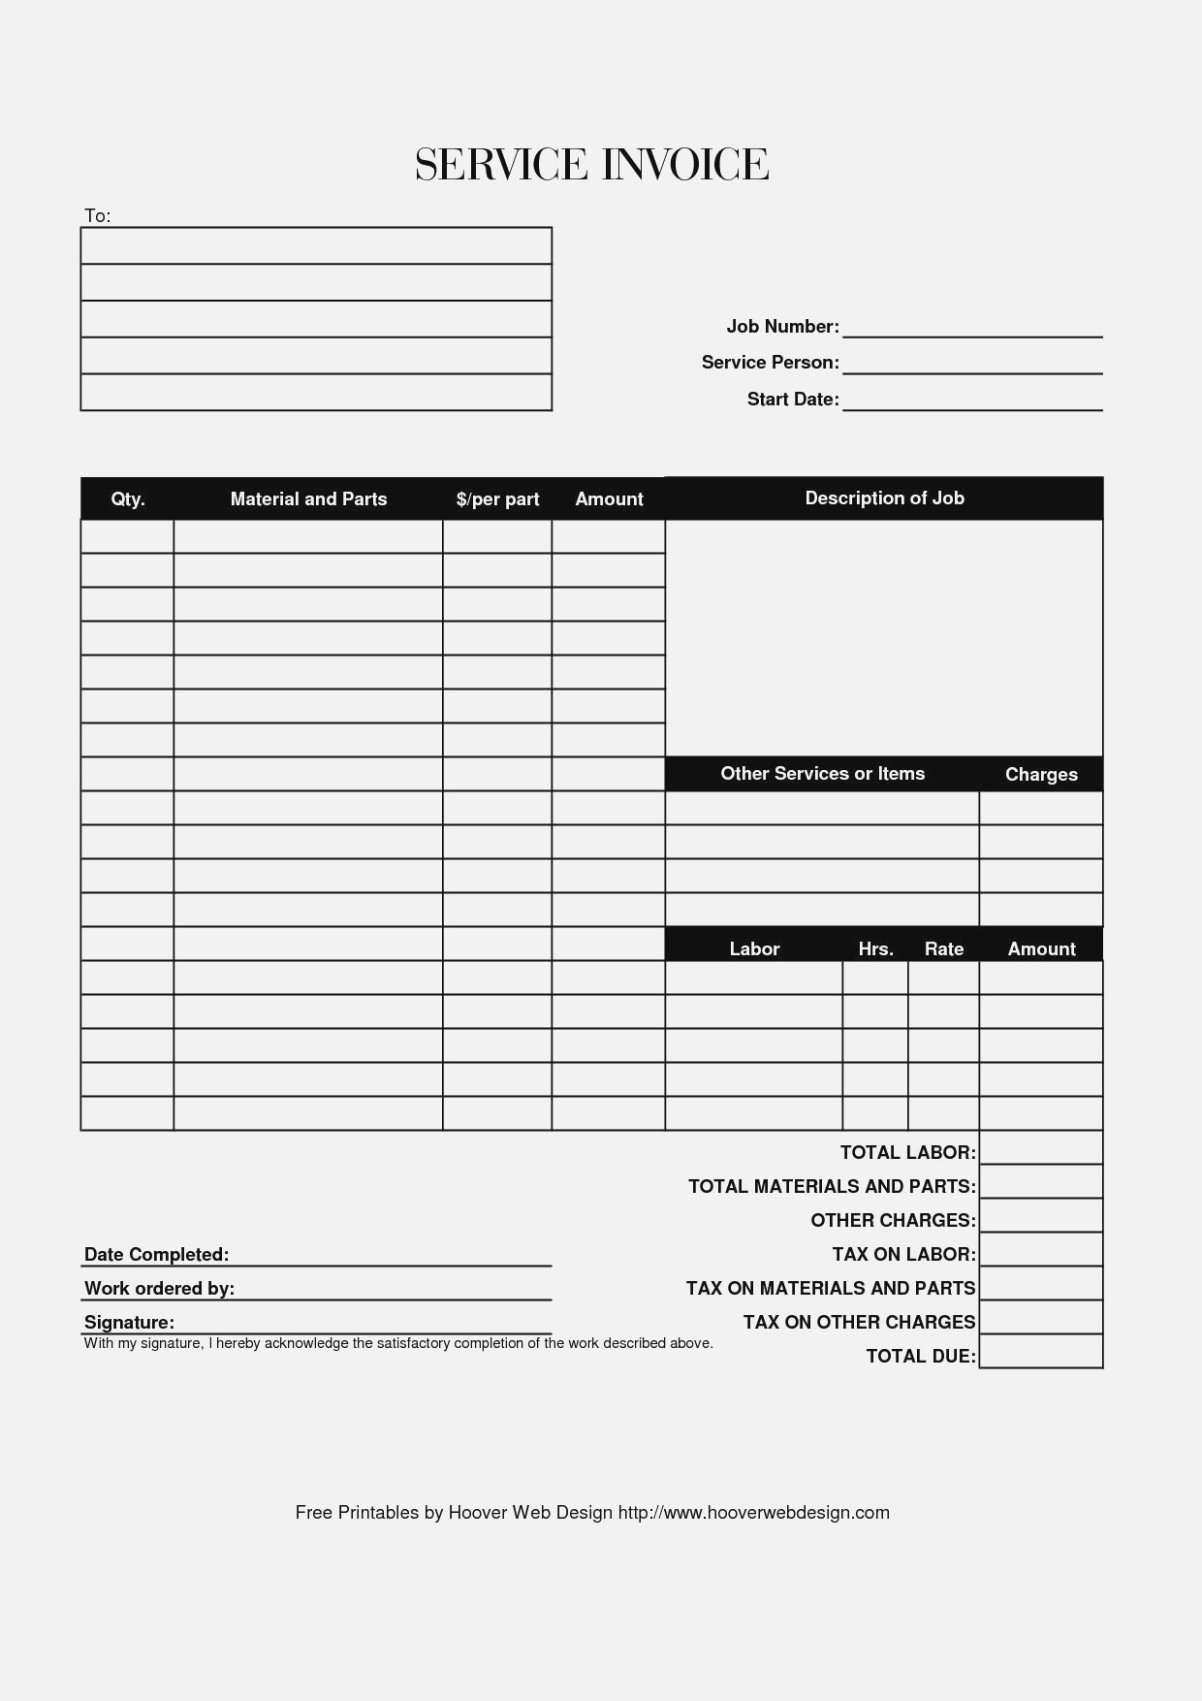 Examples Of Templates Invoices Free Excel With Templates Invoices Free Excel Download For Free